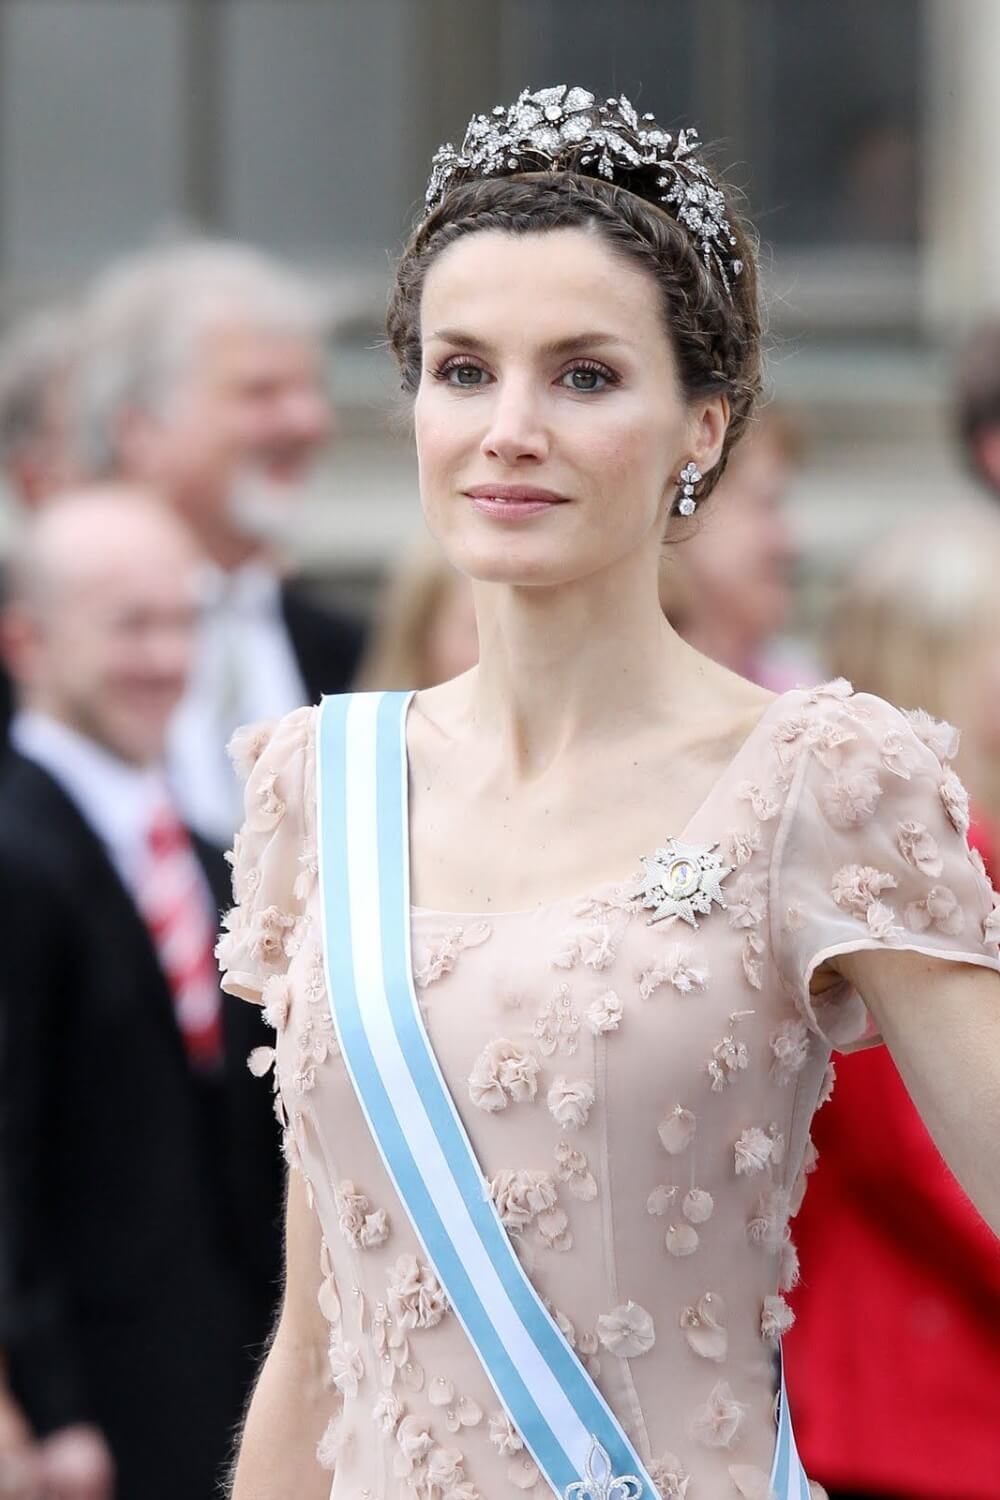 Queen Letizia adorned with the Spanish Floral Tiara